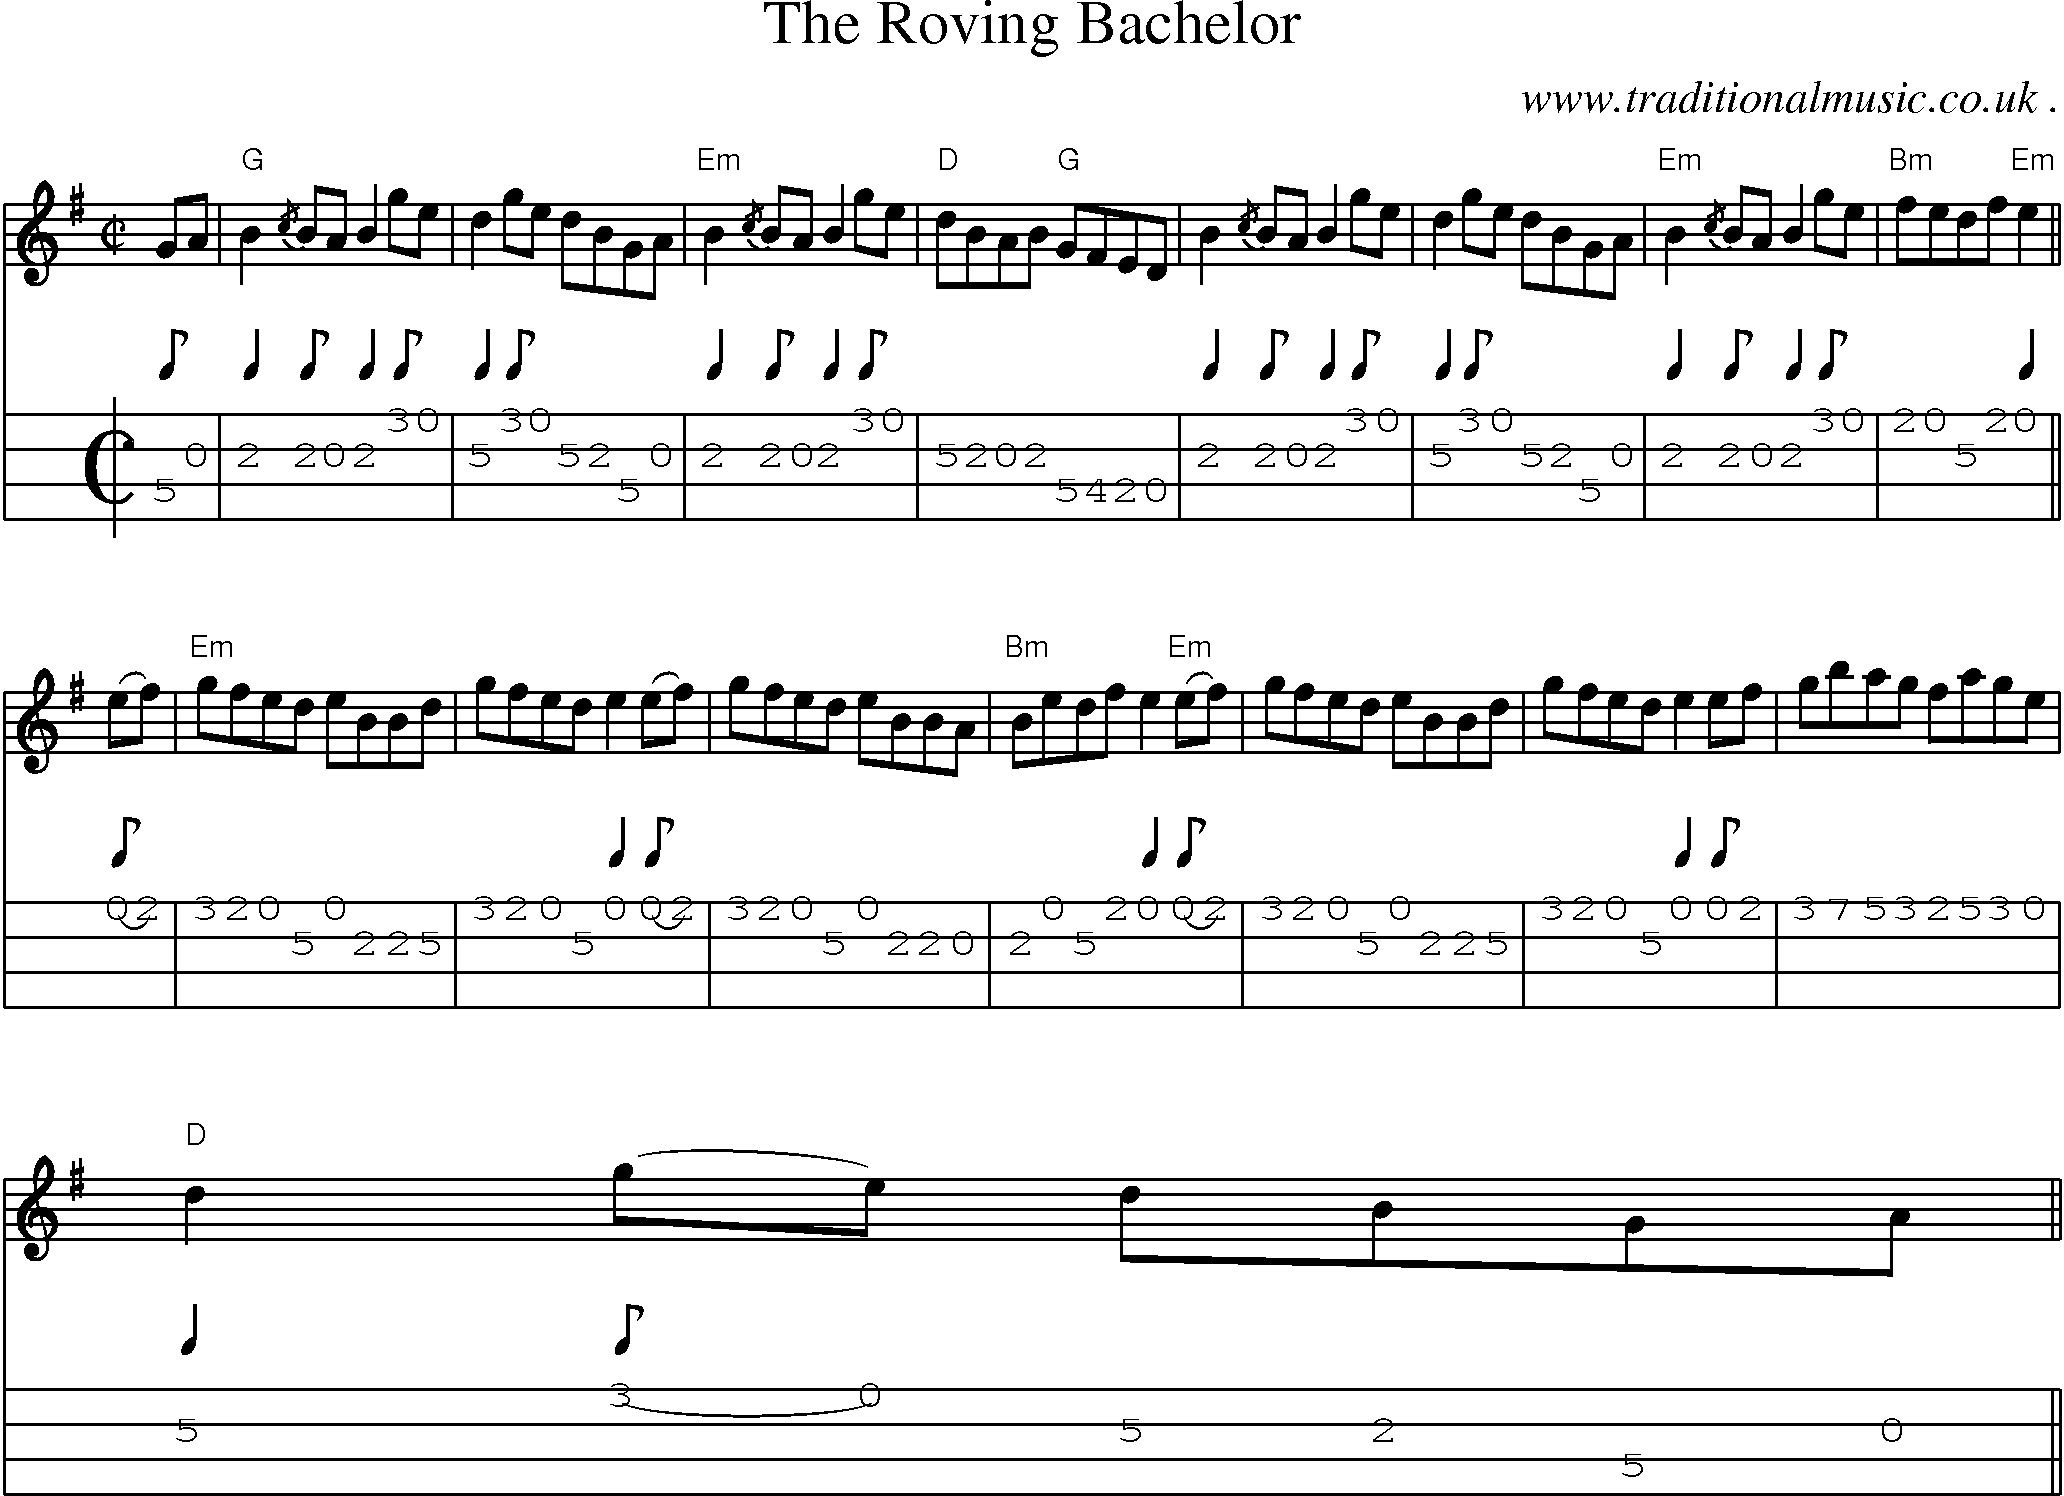 Music Score and Guitar Tabs for The Roving Bachelor